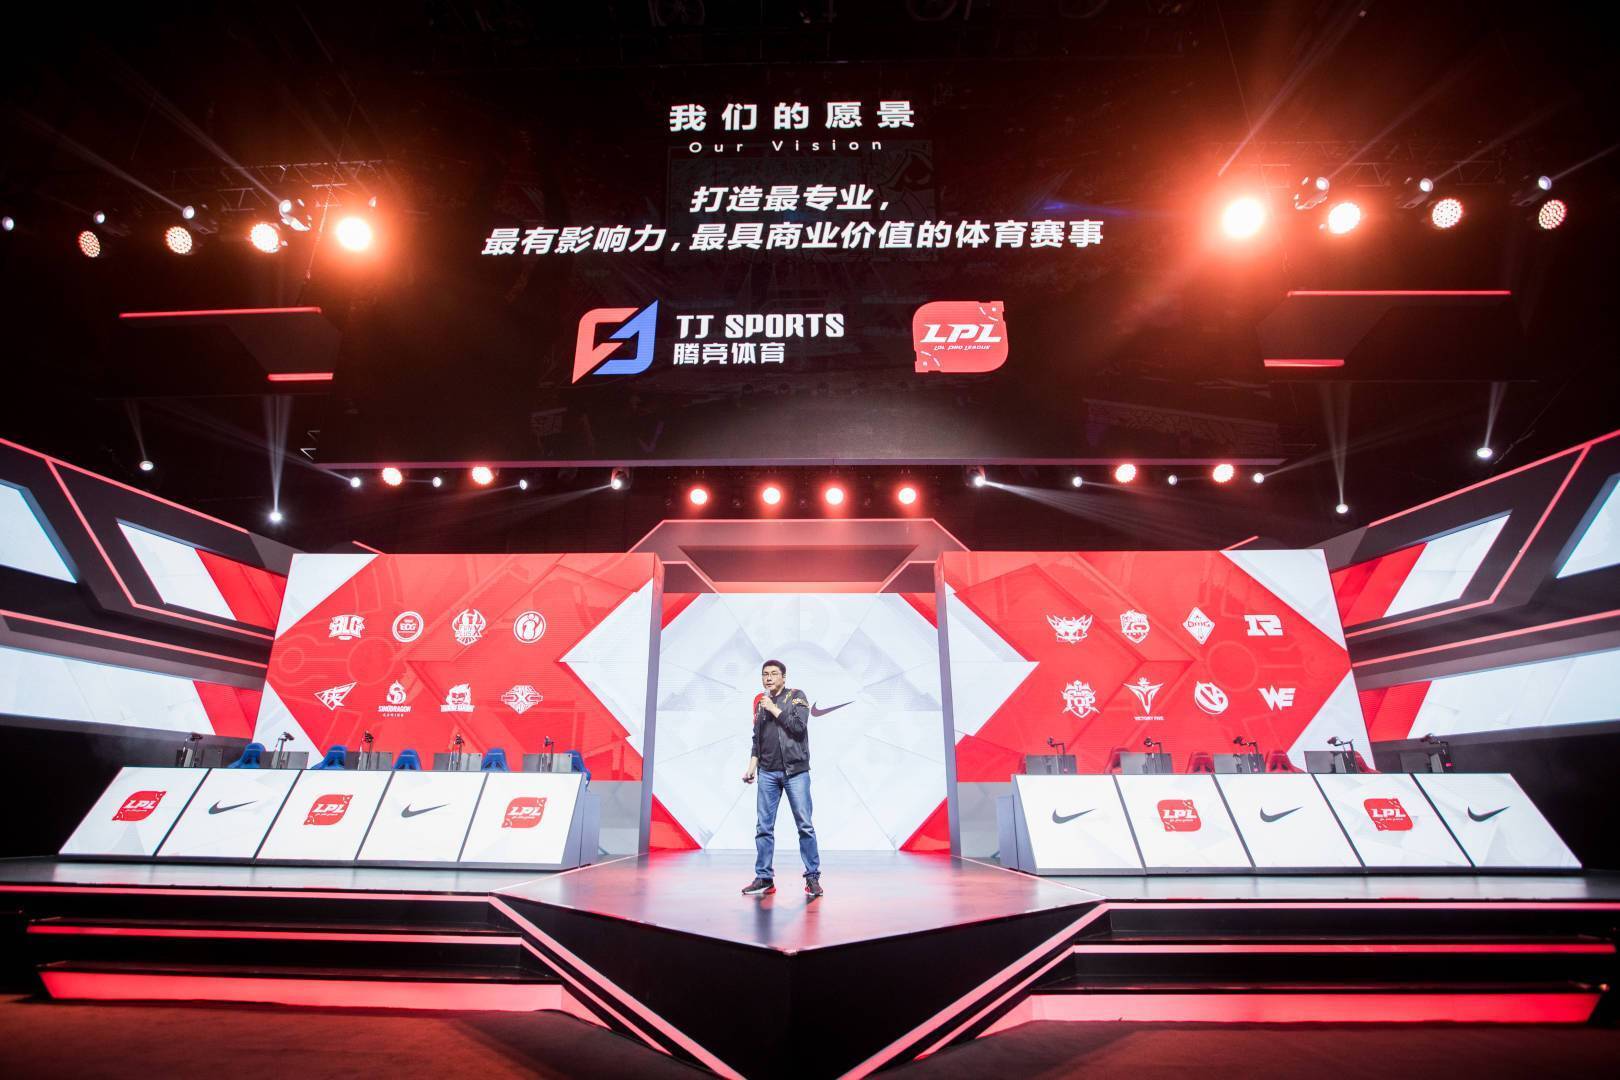 With nine weeks are down in the 2019 LPL Spring Split; Team We, SinoDragon, and Bilibili Gaming are fighting for the last three playoff spots.